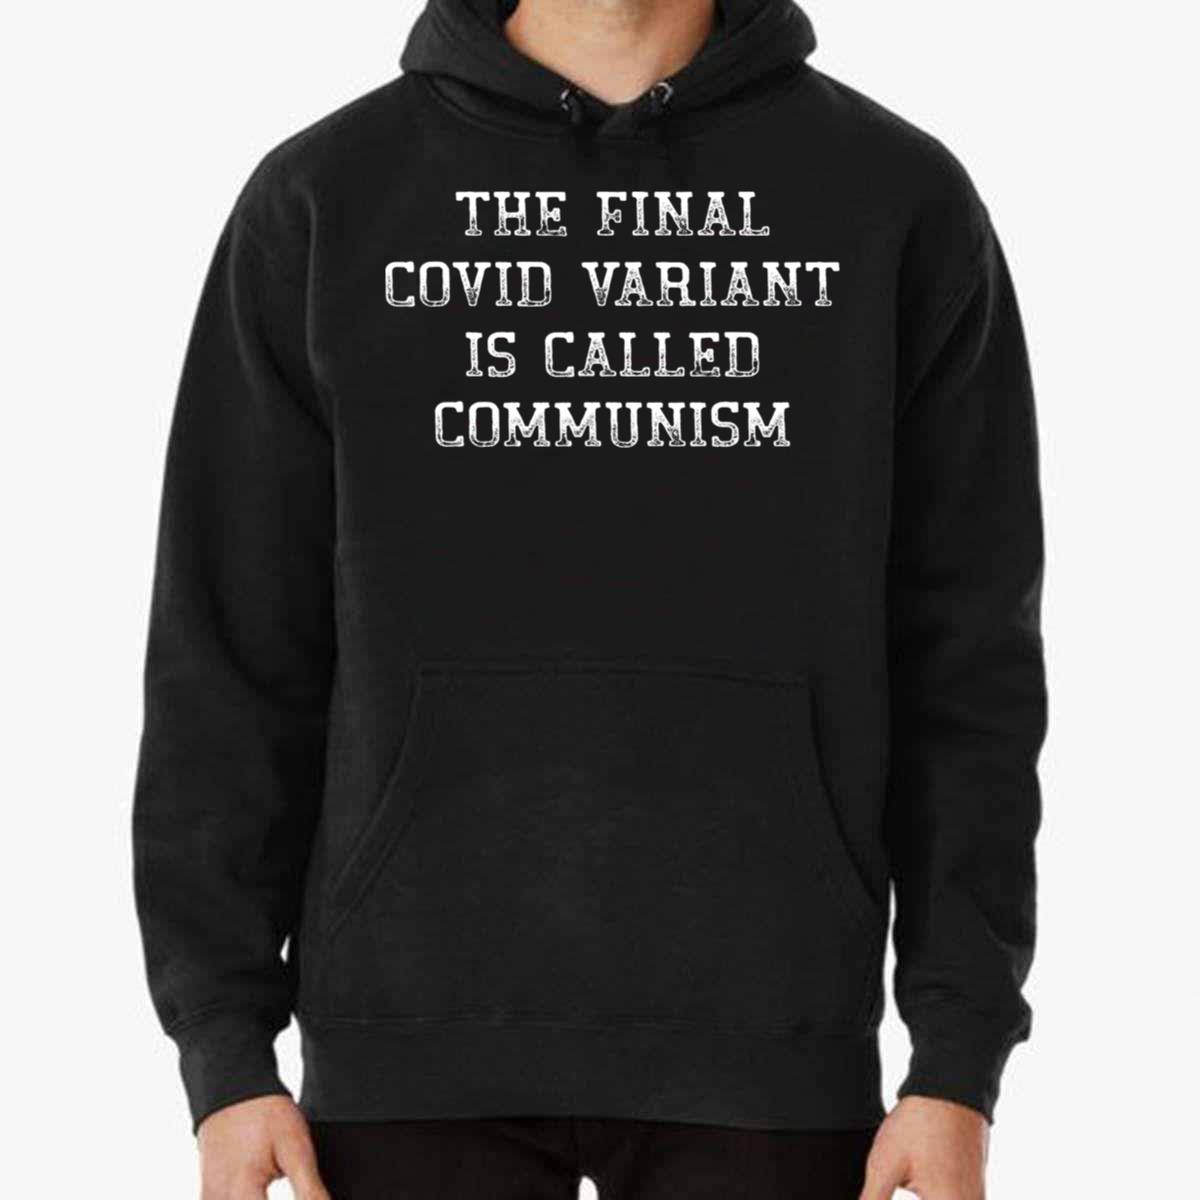 The Final Covid Variant Is Called Communism T-shirt